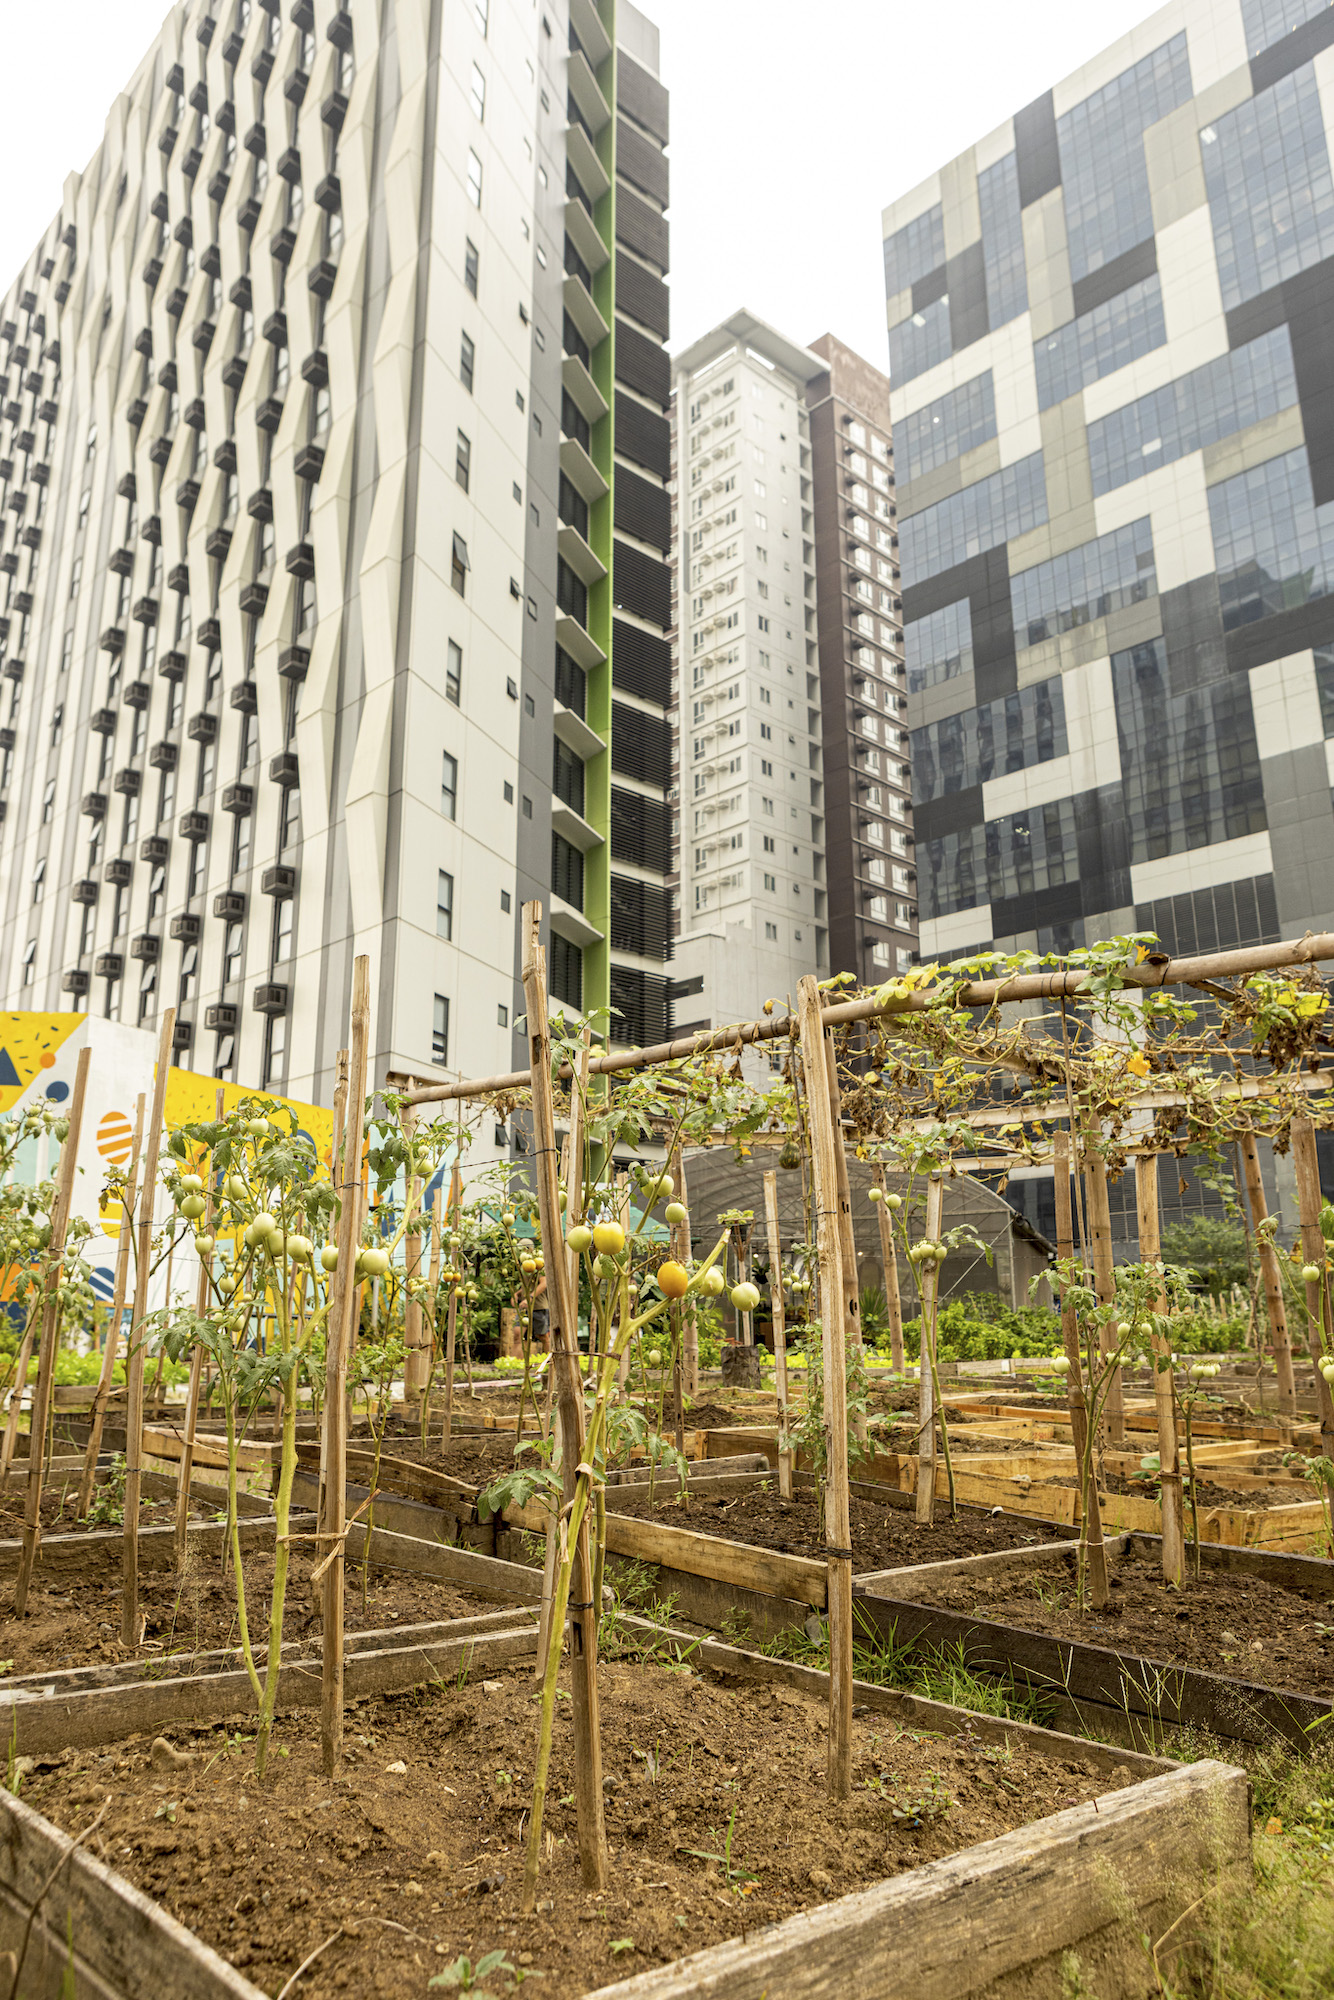 Urban Farmers is home to plenty of crops